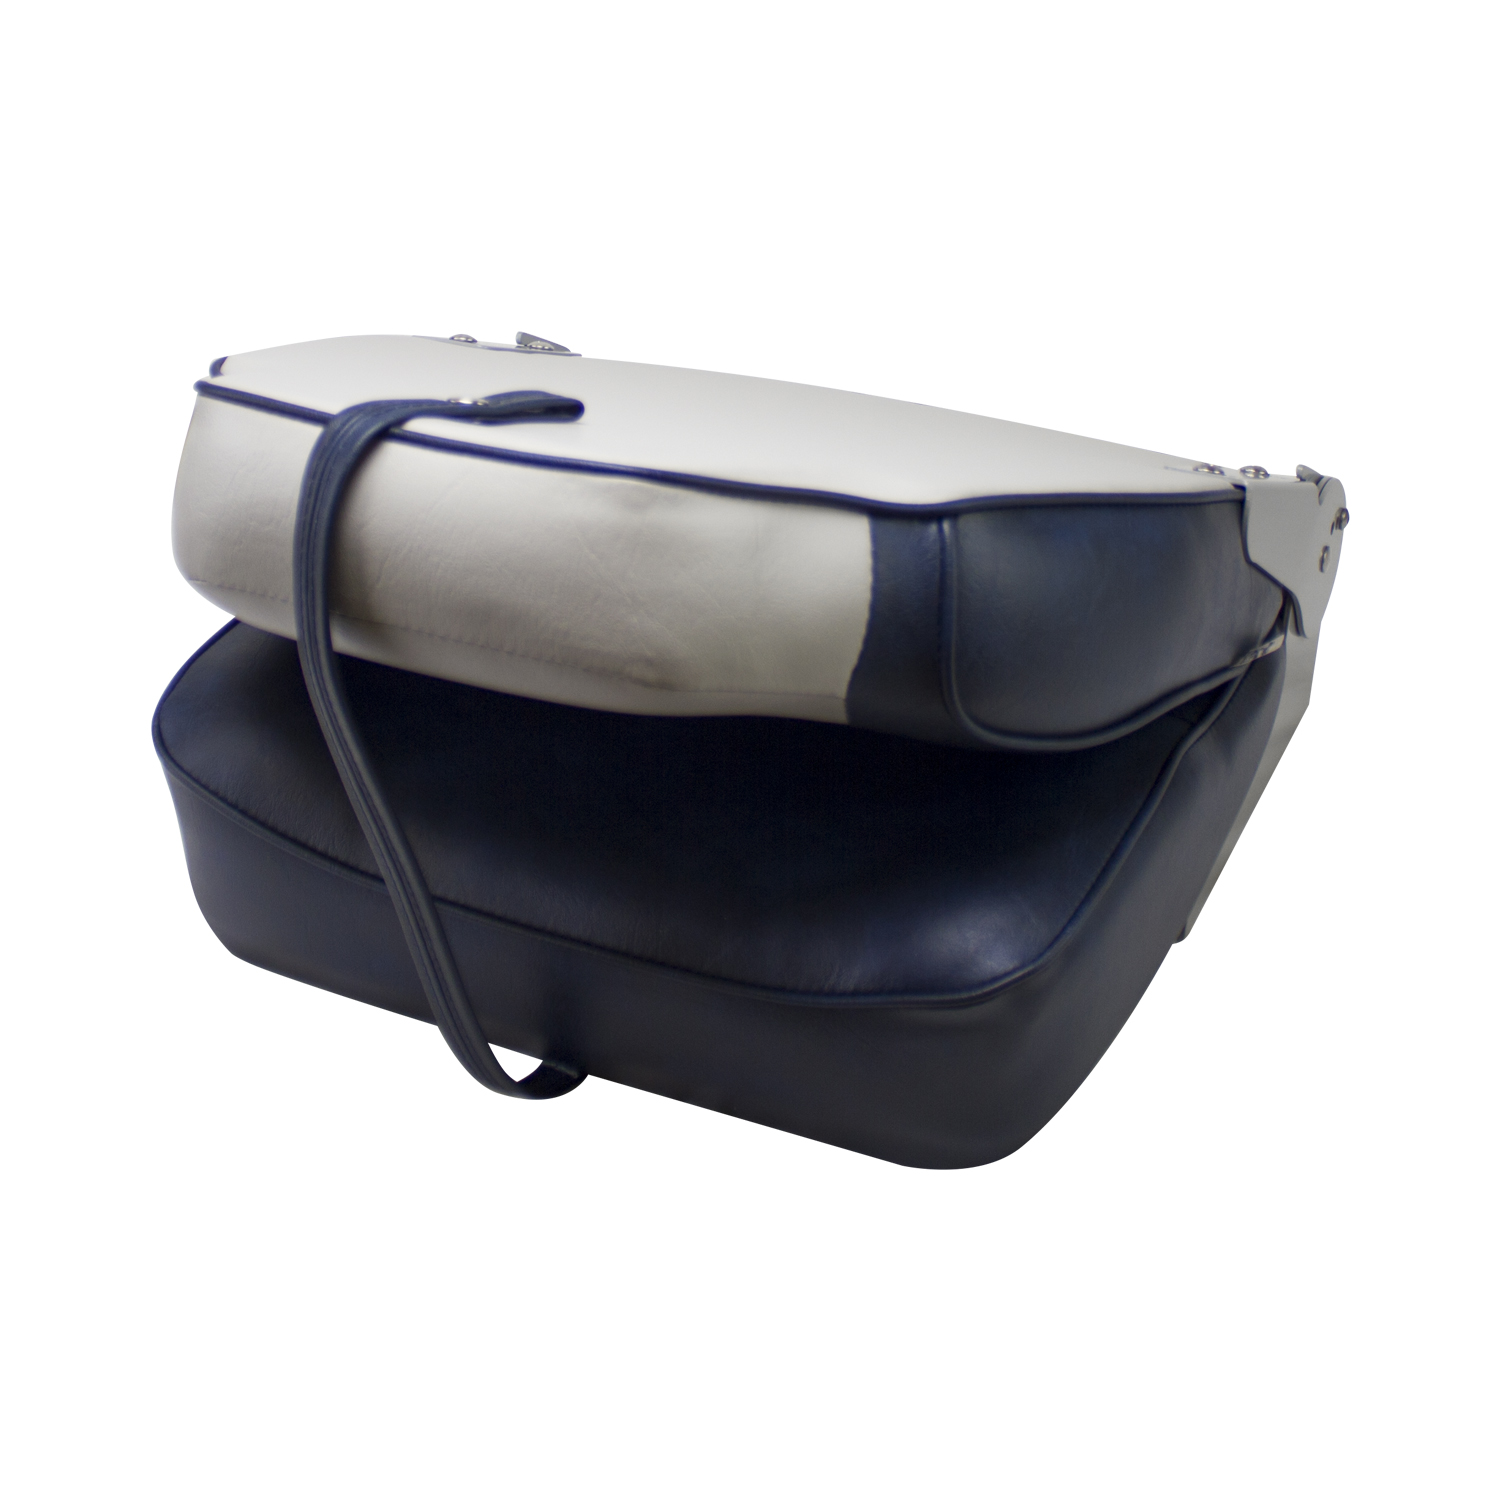 Wise 8WD640PLS-660 Lund Style High-Back Boat Seat, Grey / Navy - image 4 of 4